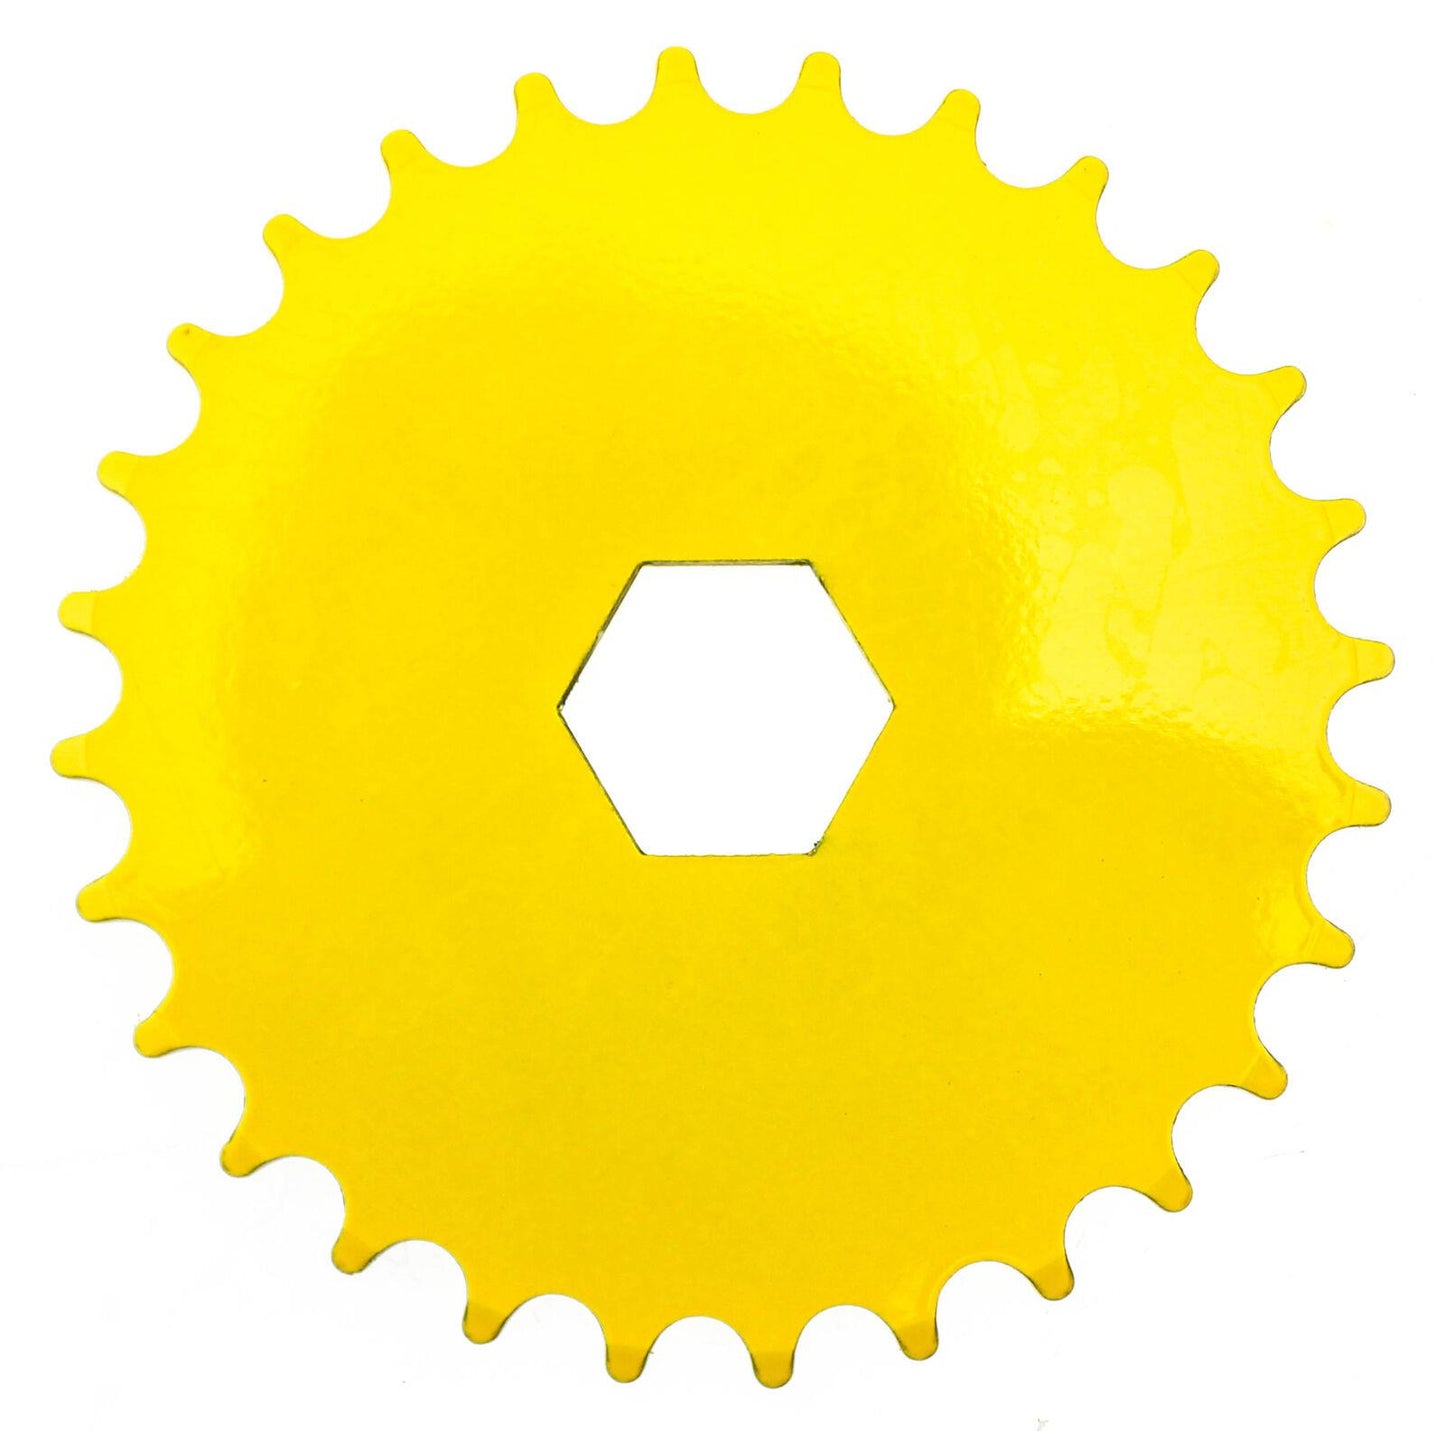 Hex Mount Bike Chainring 28T 1/8" 176g Yellow Steel Kid's Youth BMX New